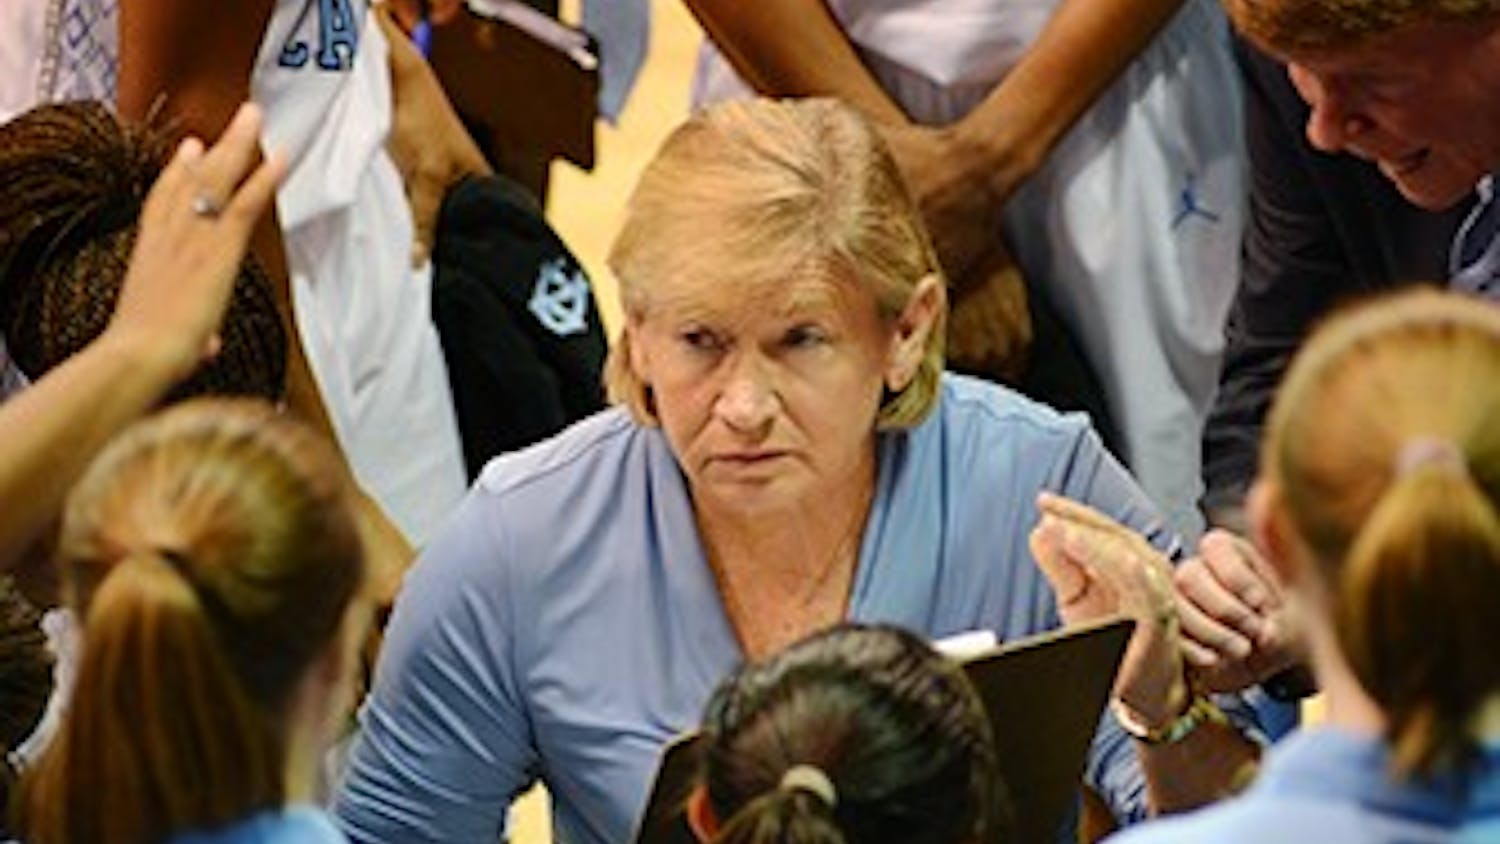 Sylvia Hatchell, UNC’s women’s basketball coach, announced her temporary leave from coaching duties in the fall.